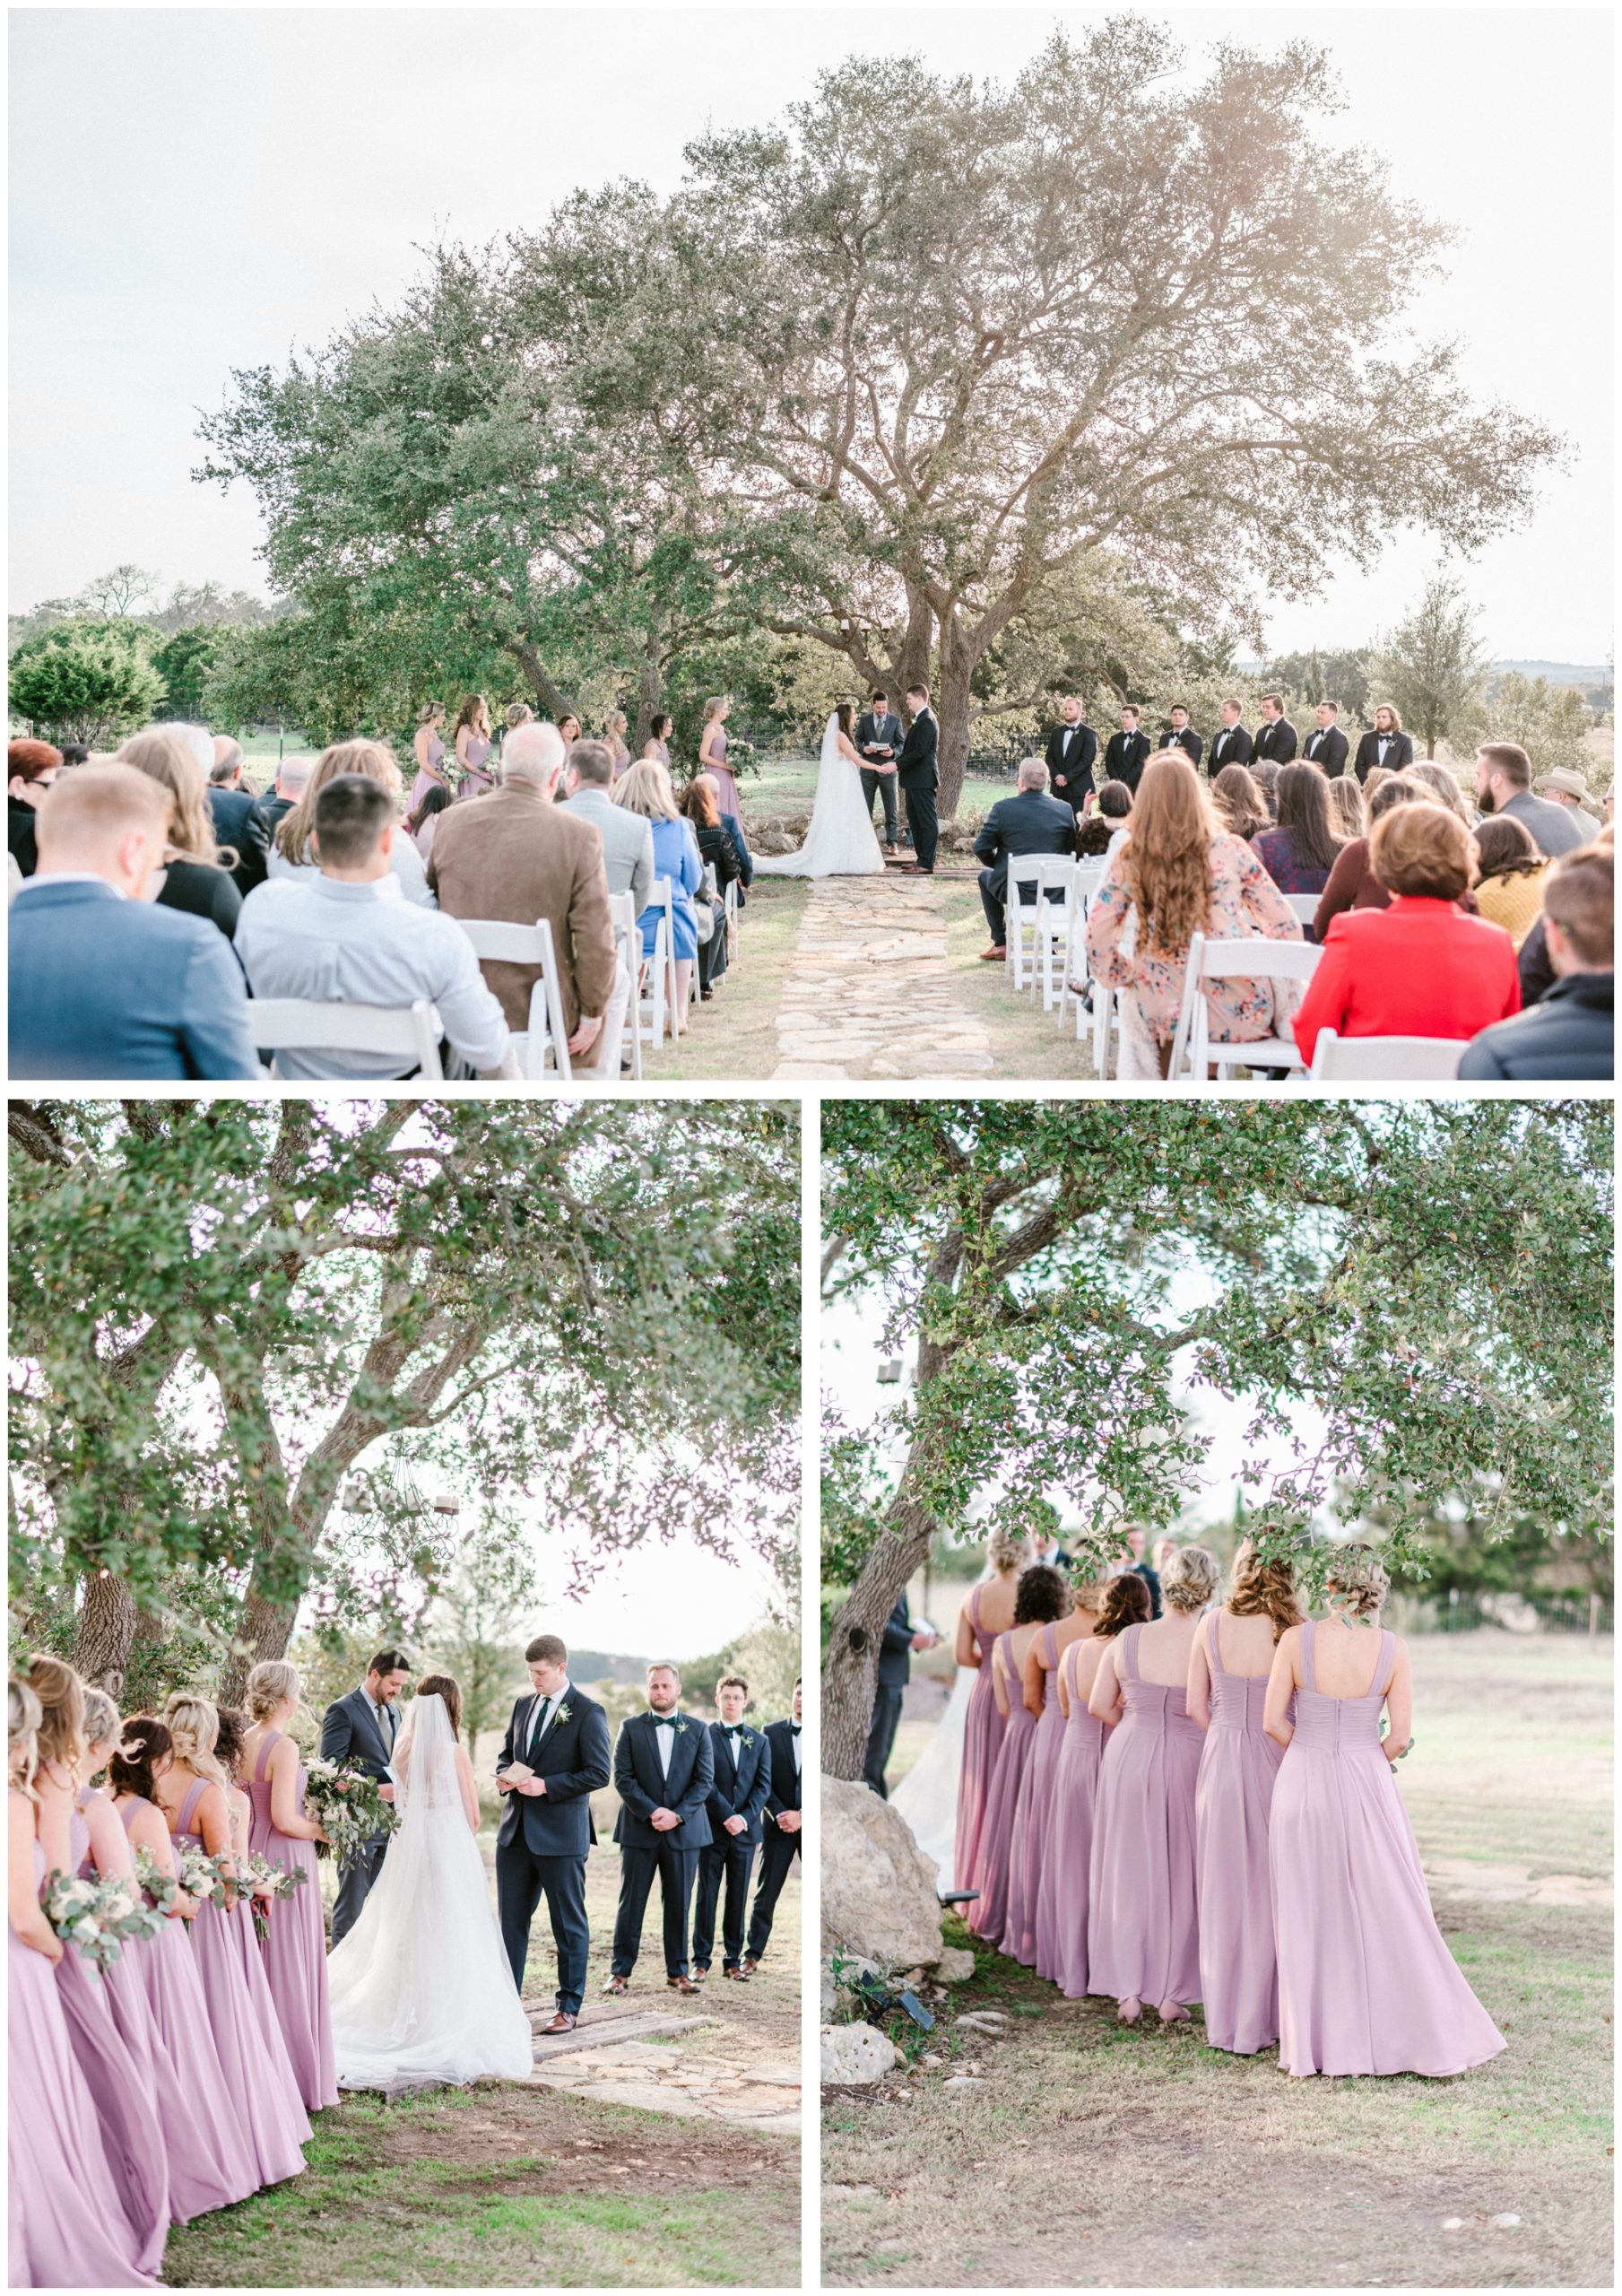 Hayley and Riley’s wedding ceremony at Cricket Hill Ranch